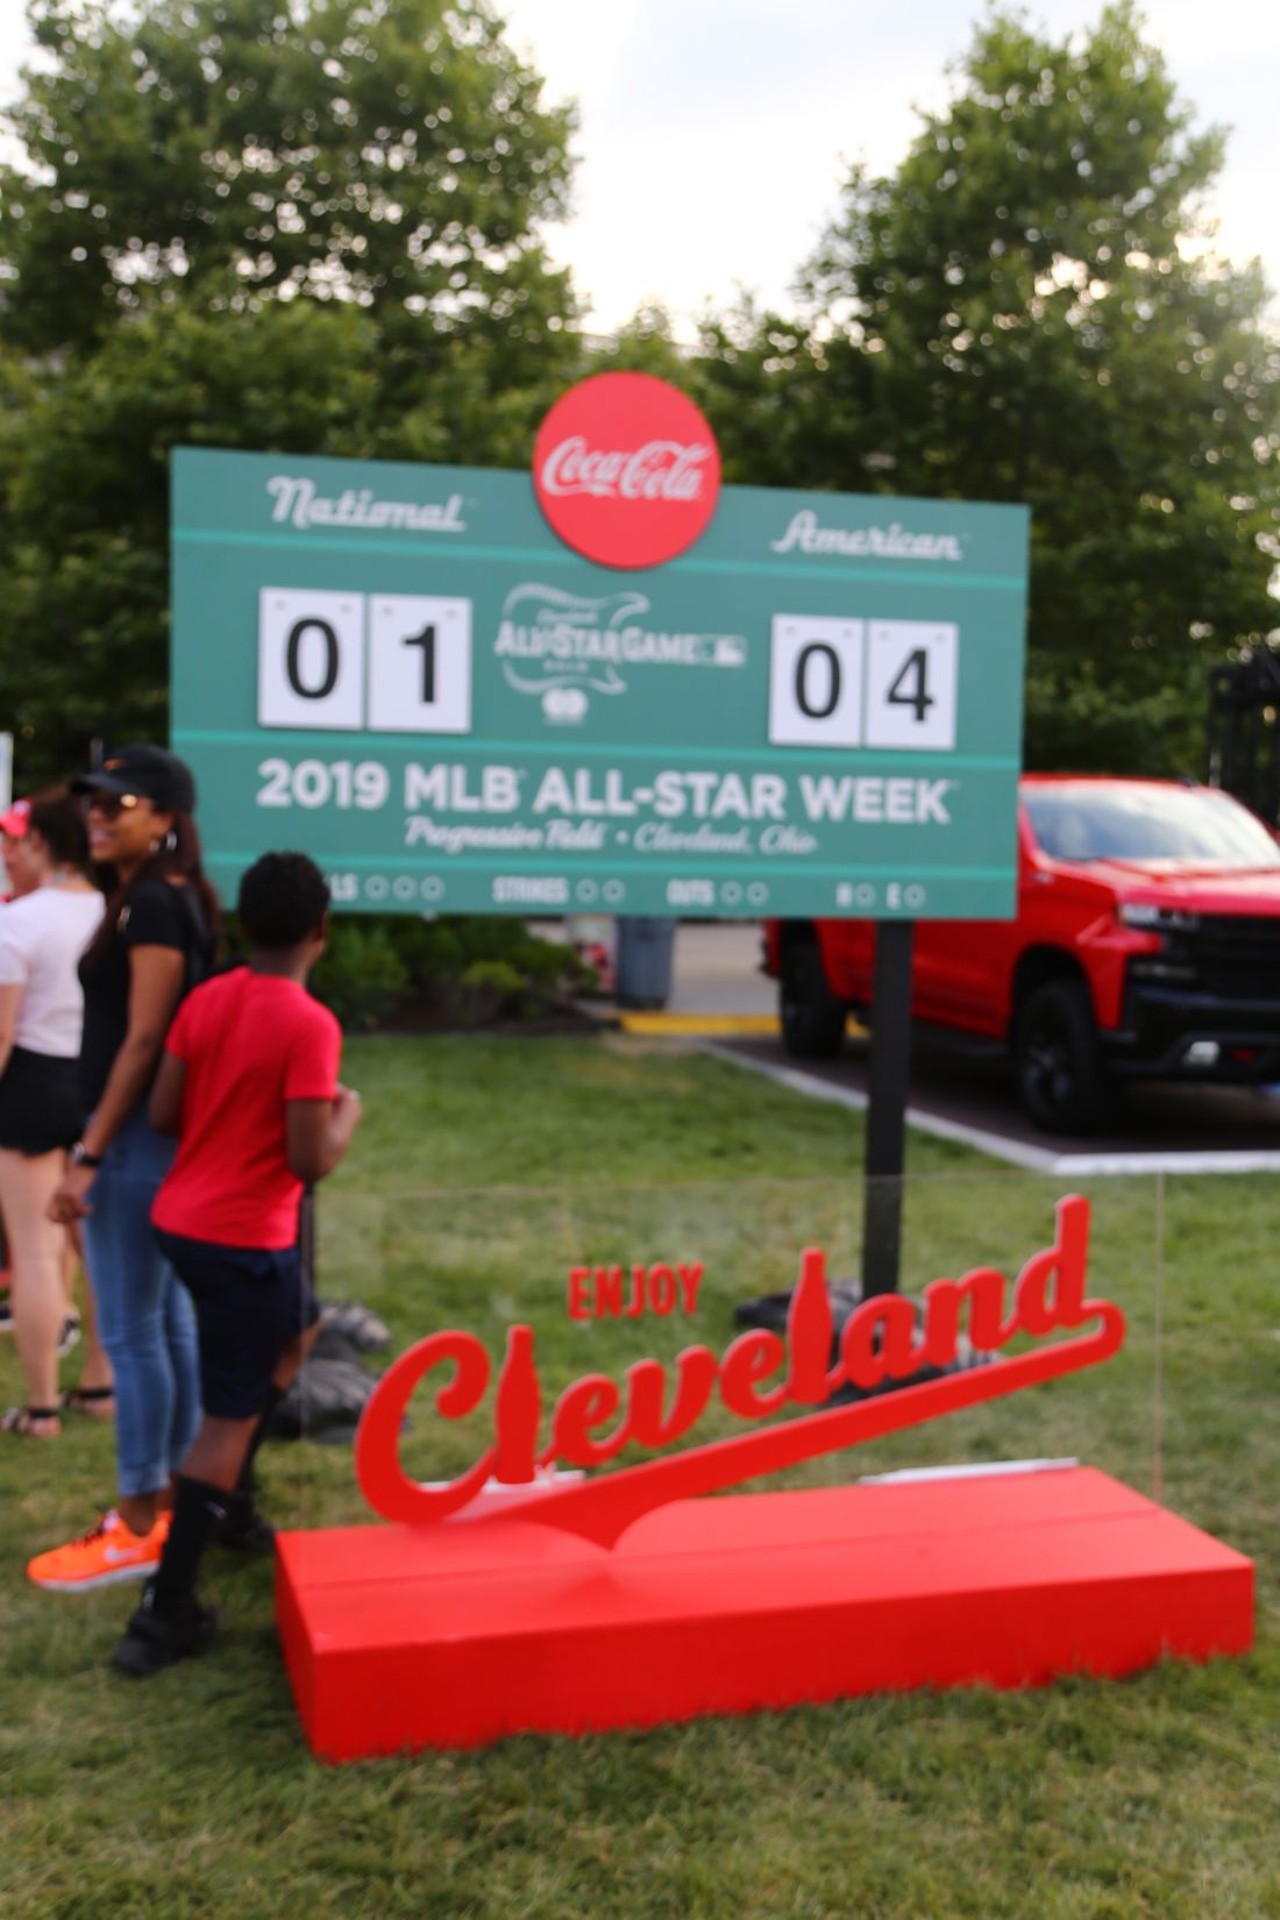 All the Ballin' Photos From MLB's Play Ball Park in Cleveland